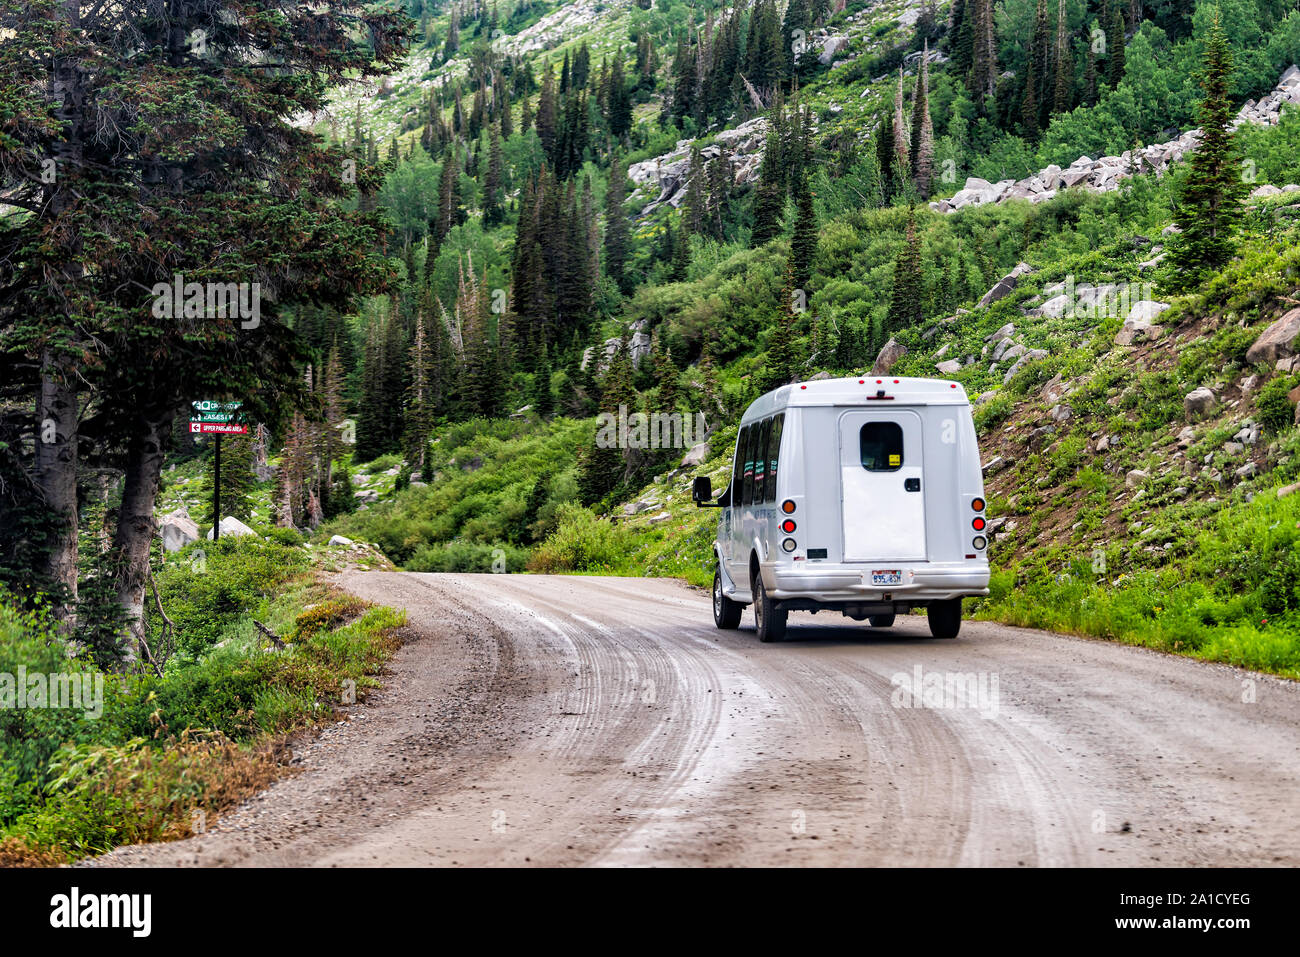 Alta, USA - July 27, 2019: Albion Basin, Utah summer with shuttle bus on dirt road in summer in Wasatch mountains Stock Photo